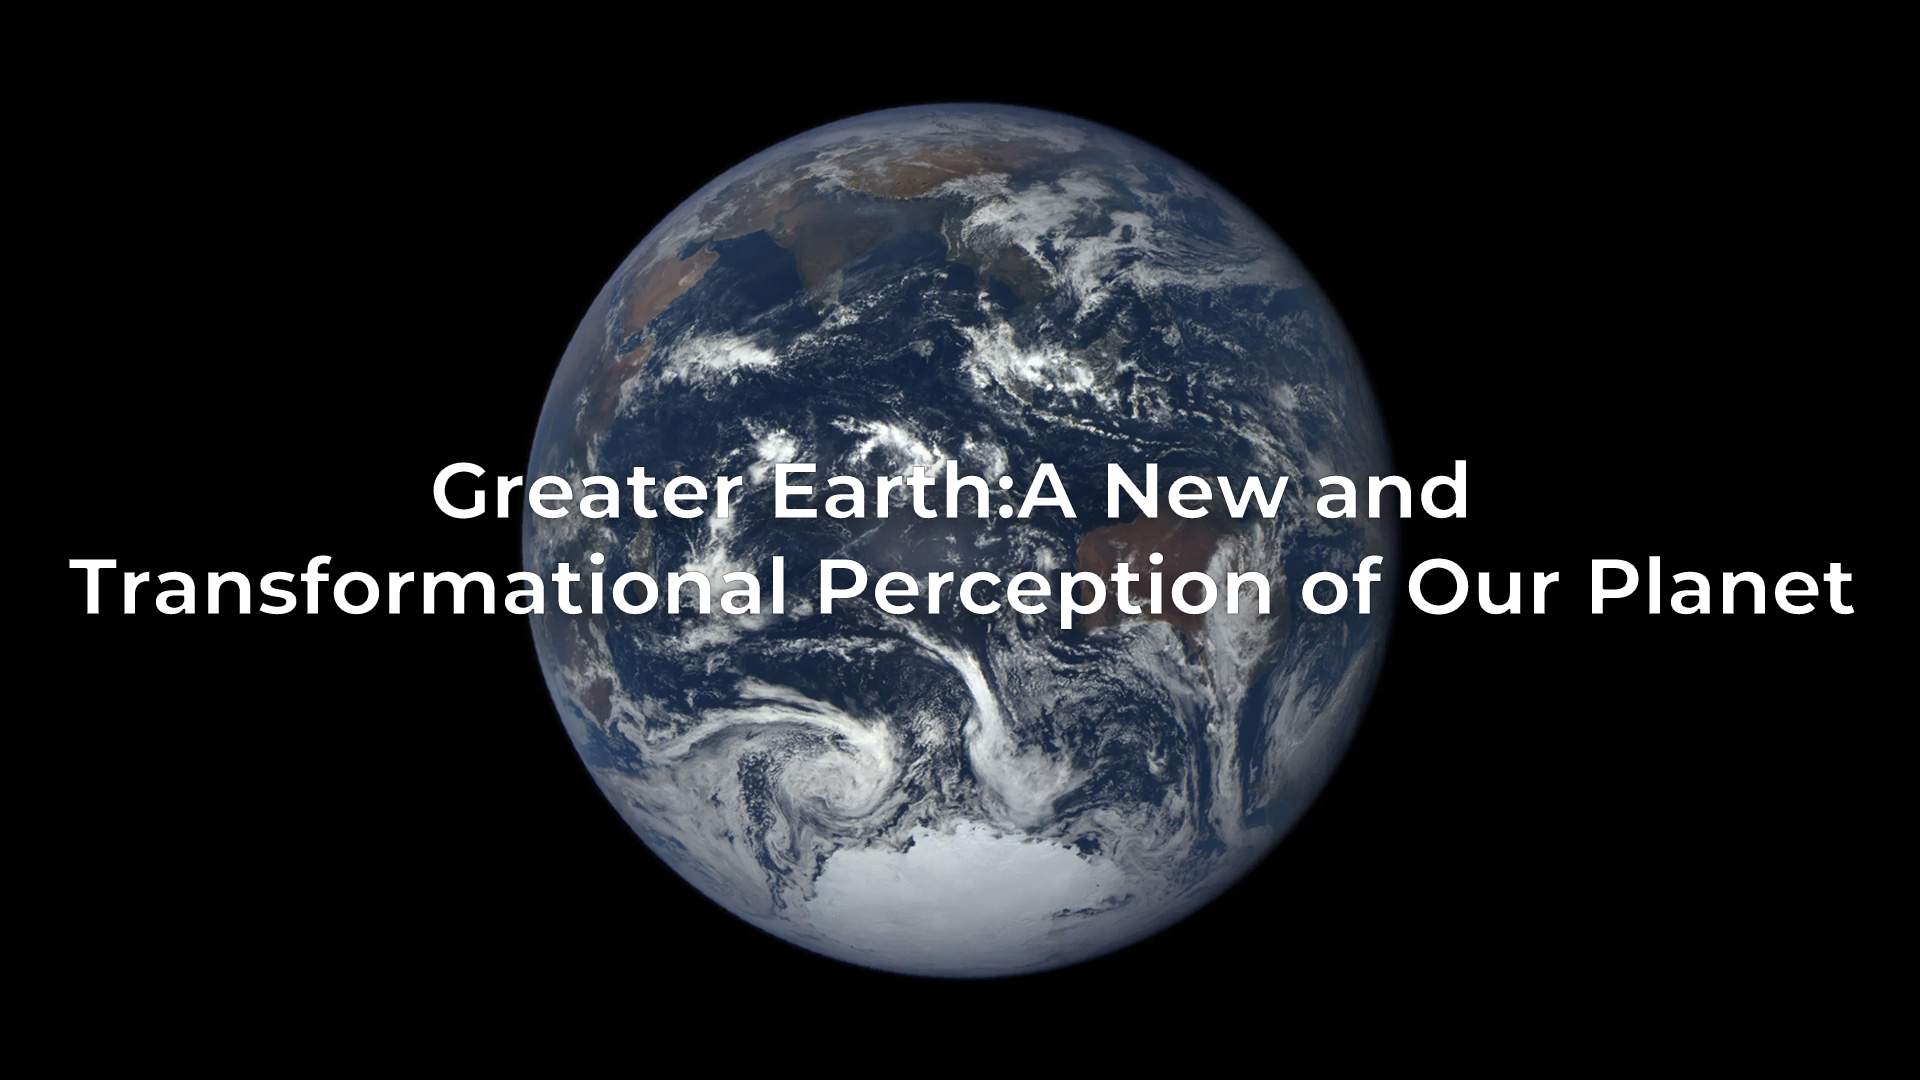 About the Name: Greater Earth